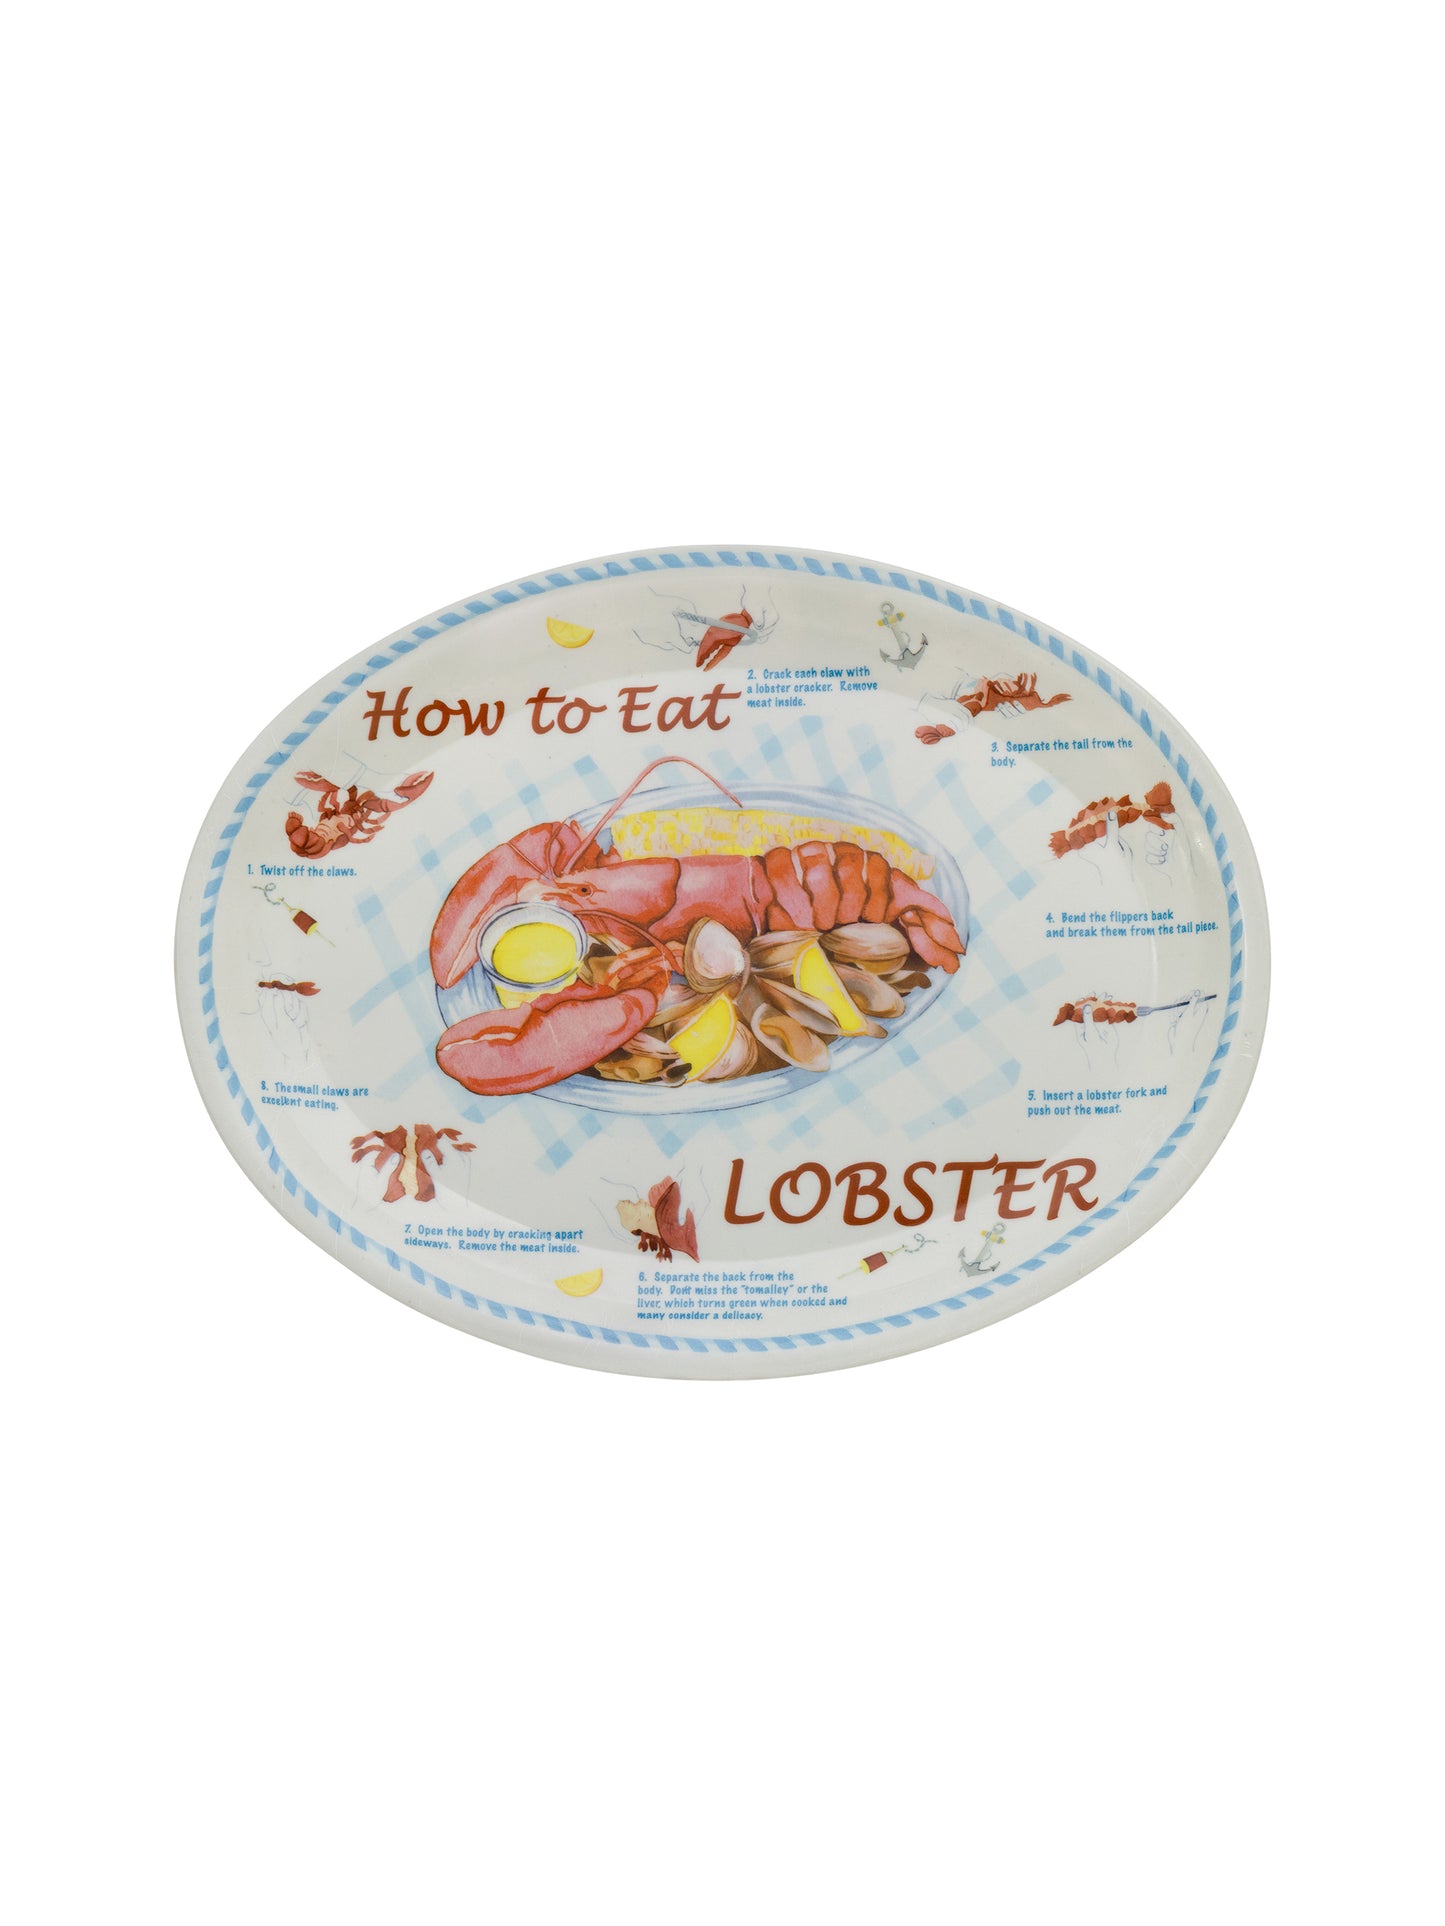 Vintage How to Eat a Lobster Oval Plate Weston Table